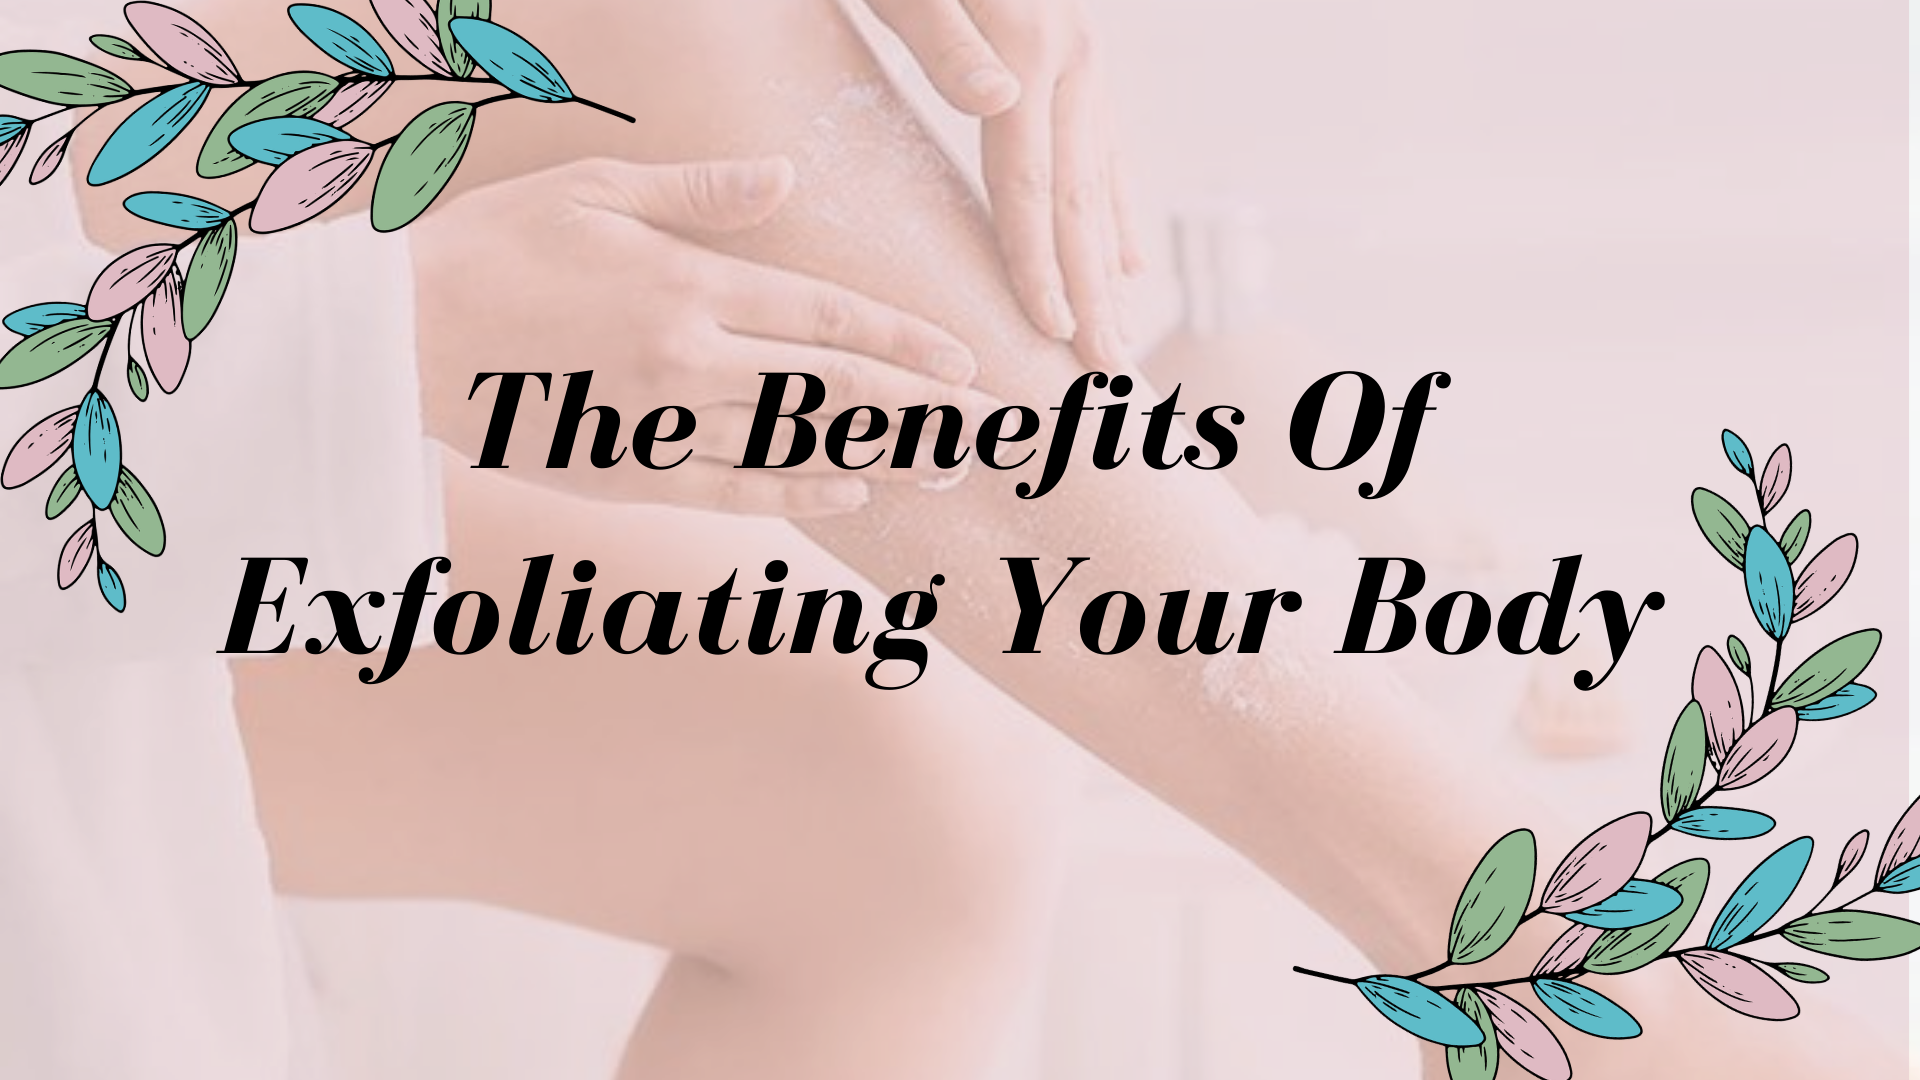 The Benefits of Exfoliating Your Body